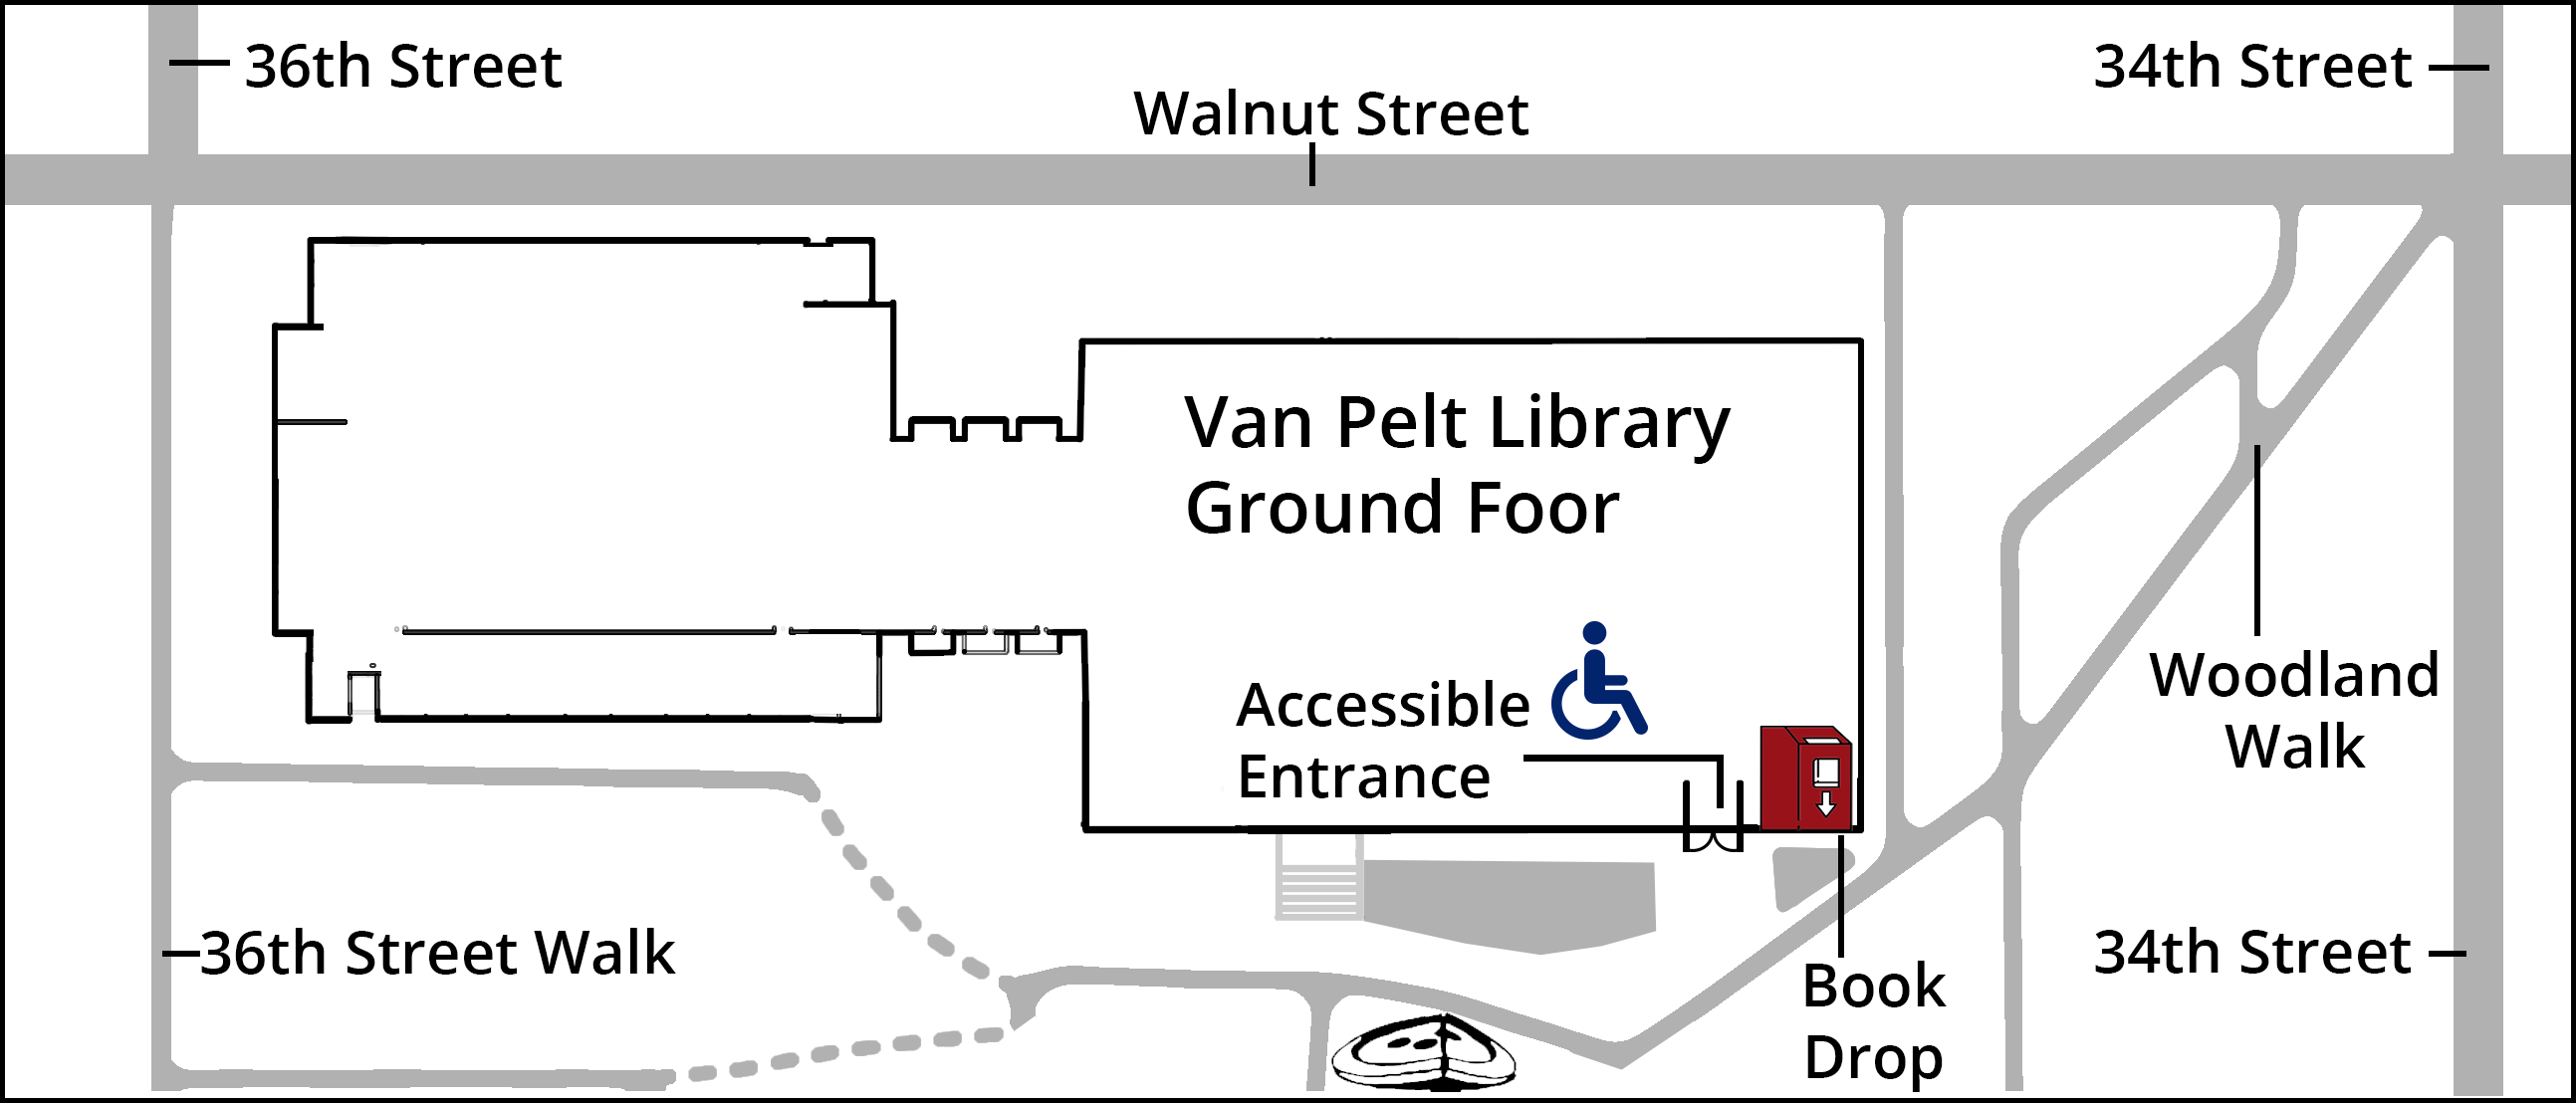 A map of the area around Van Pelt Library indicating the location of the Accessible Entrance on the ground floor and the adjacent Book Drop.